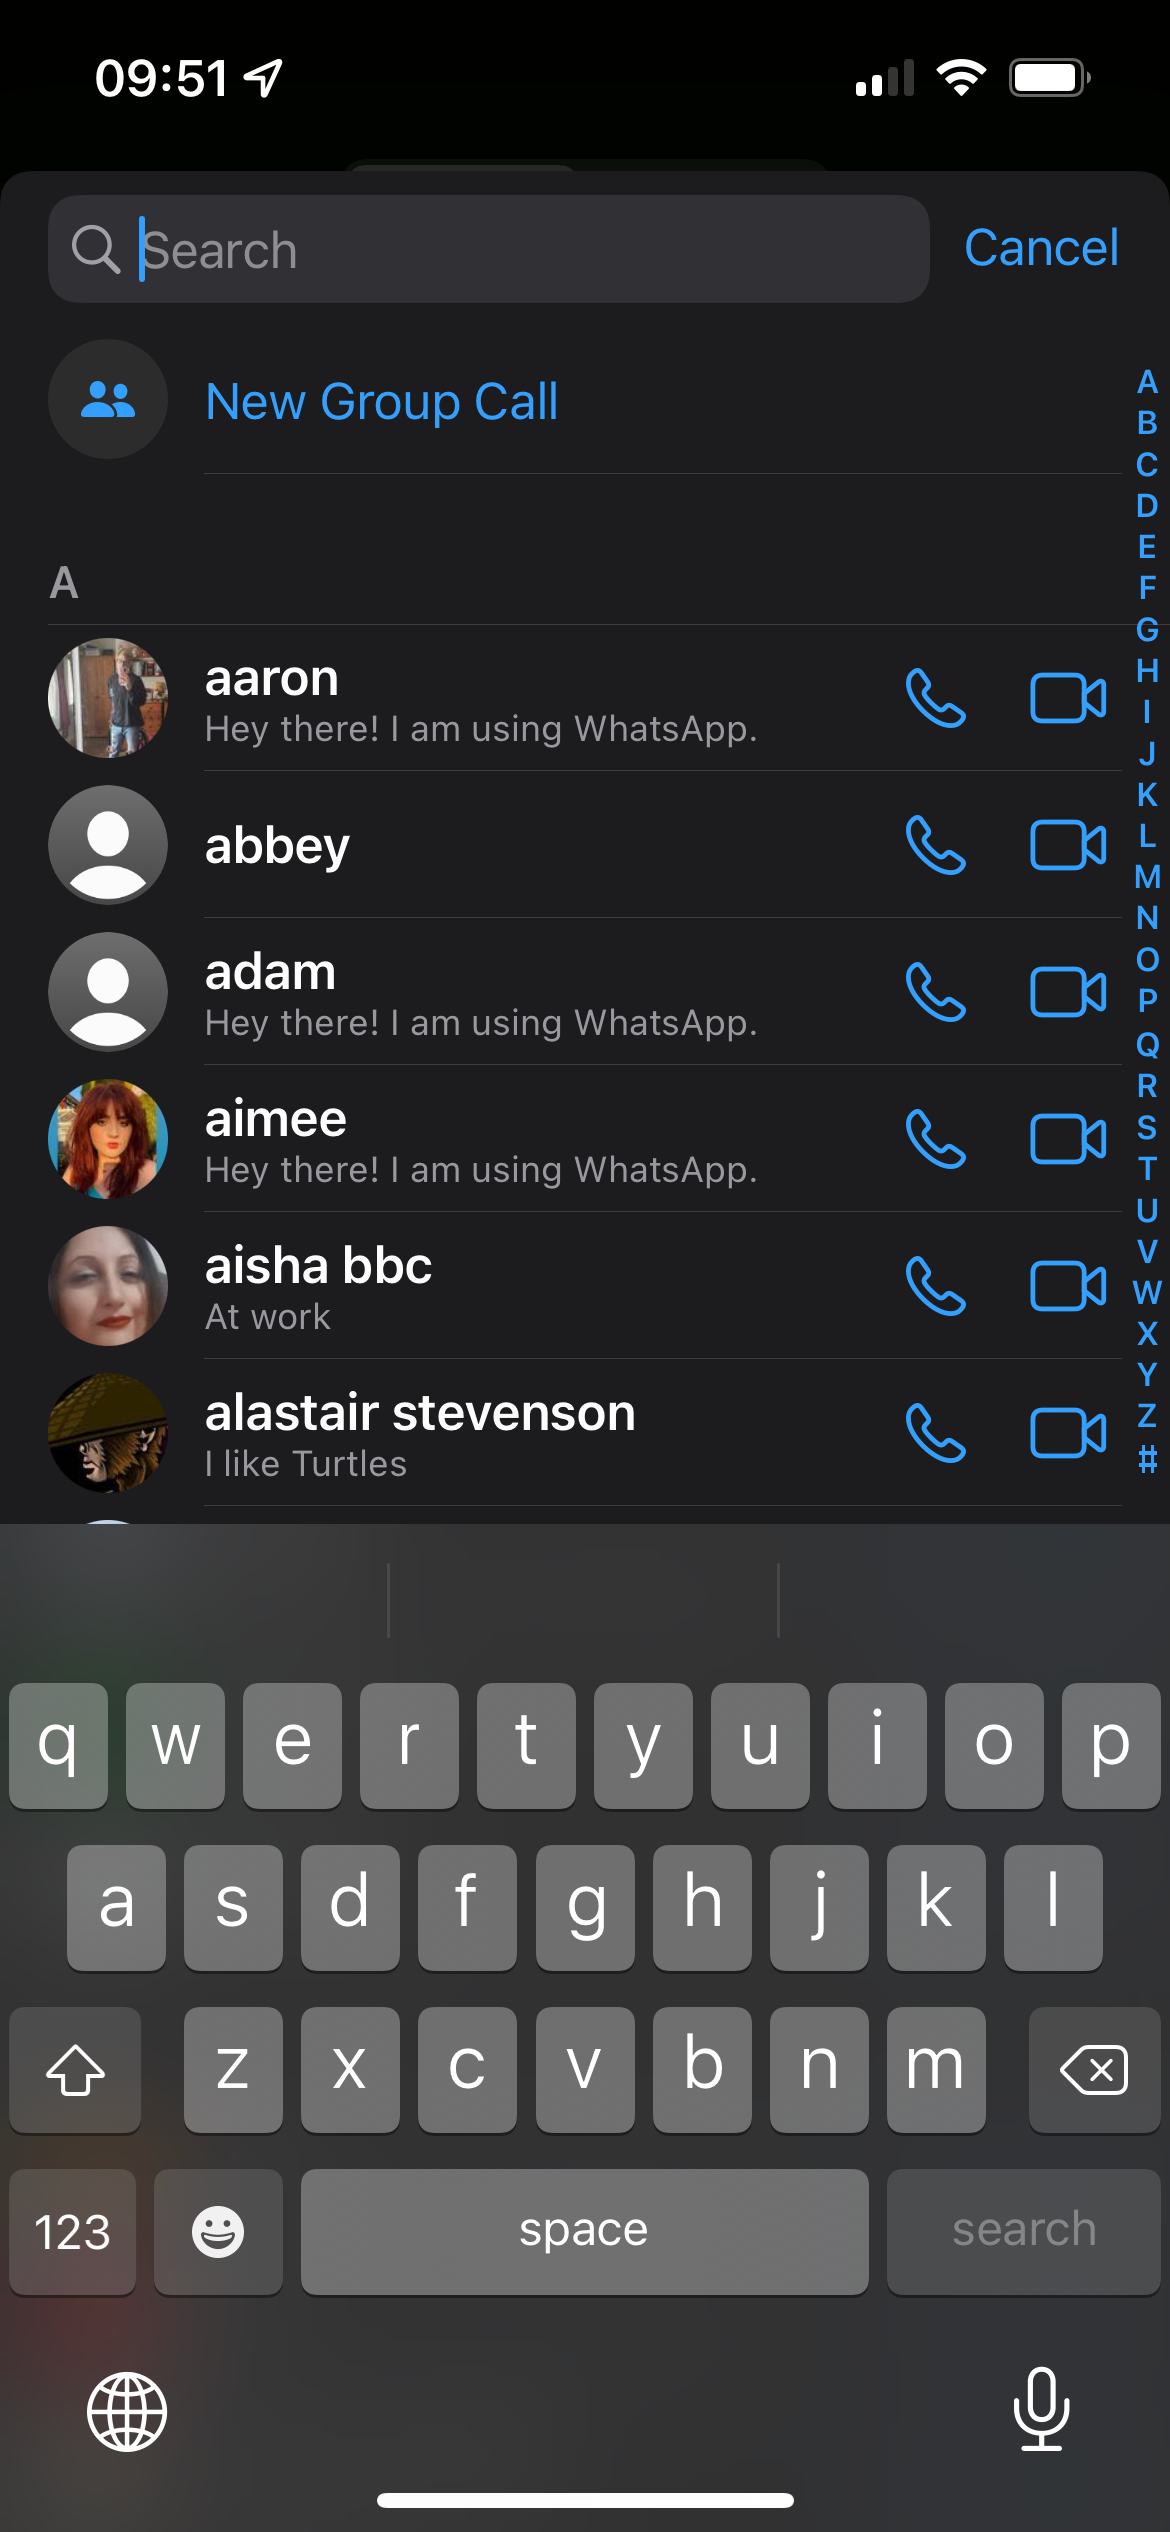 Search for the person you want to call in WhatsApp